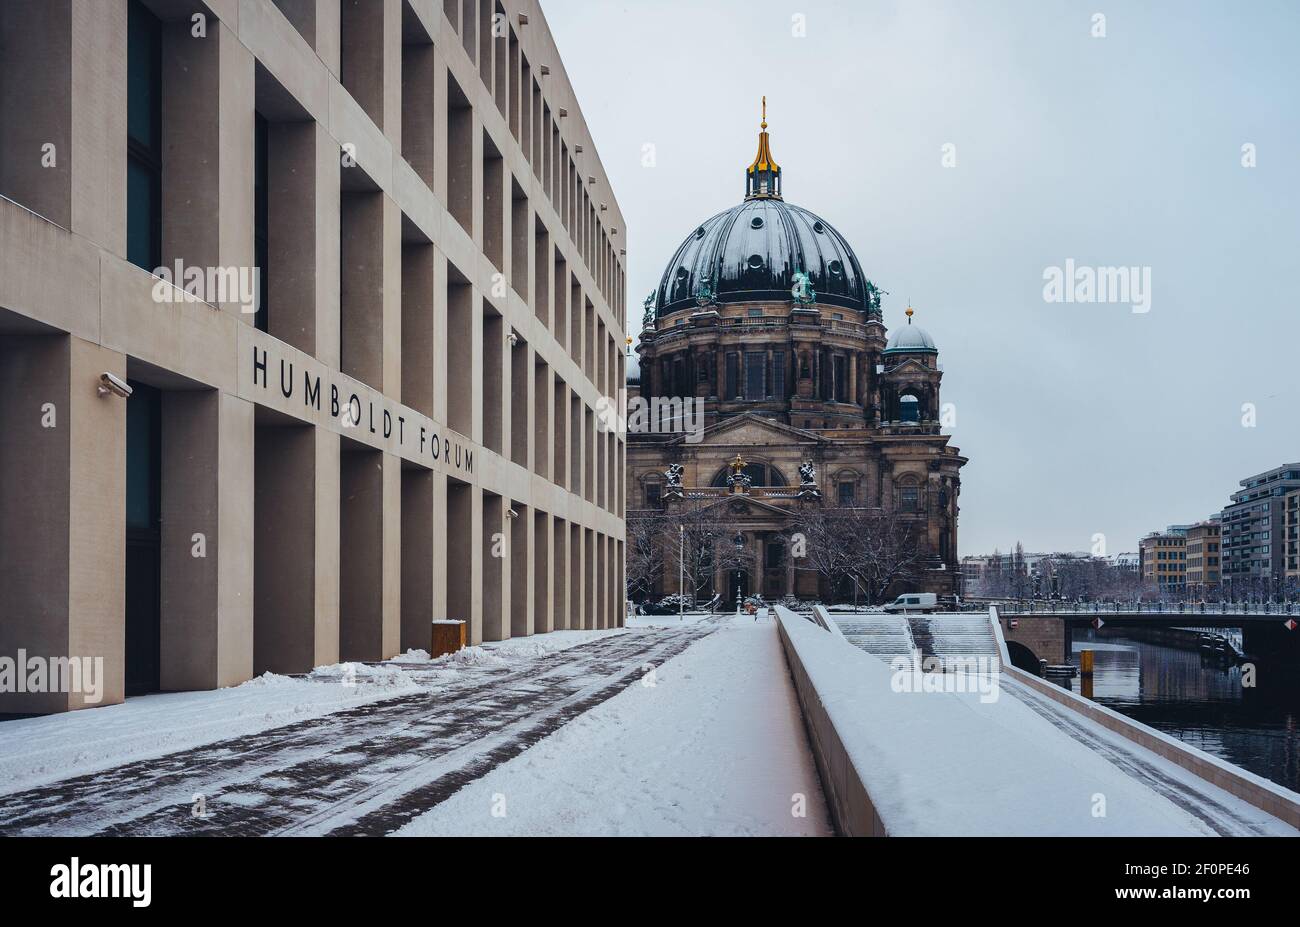 Berlin, Germany - February 06, 2021: View towards Humboldt Forum and Berlin Cathedral covered in snow during blizzard. Stock Photo